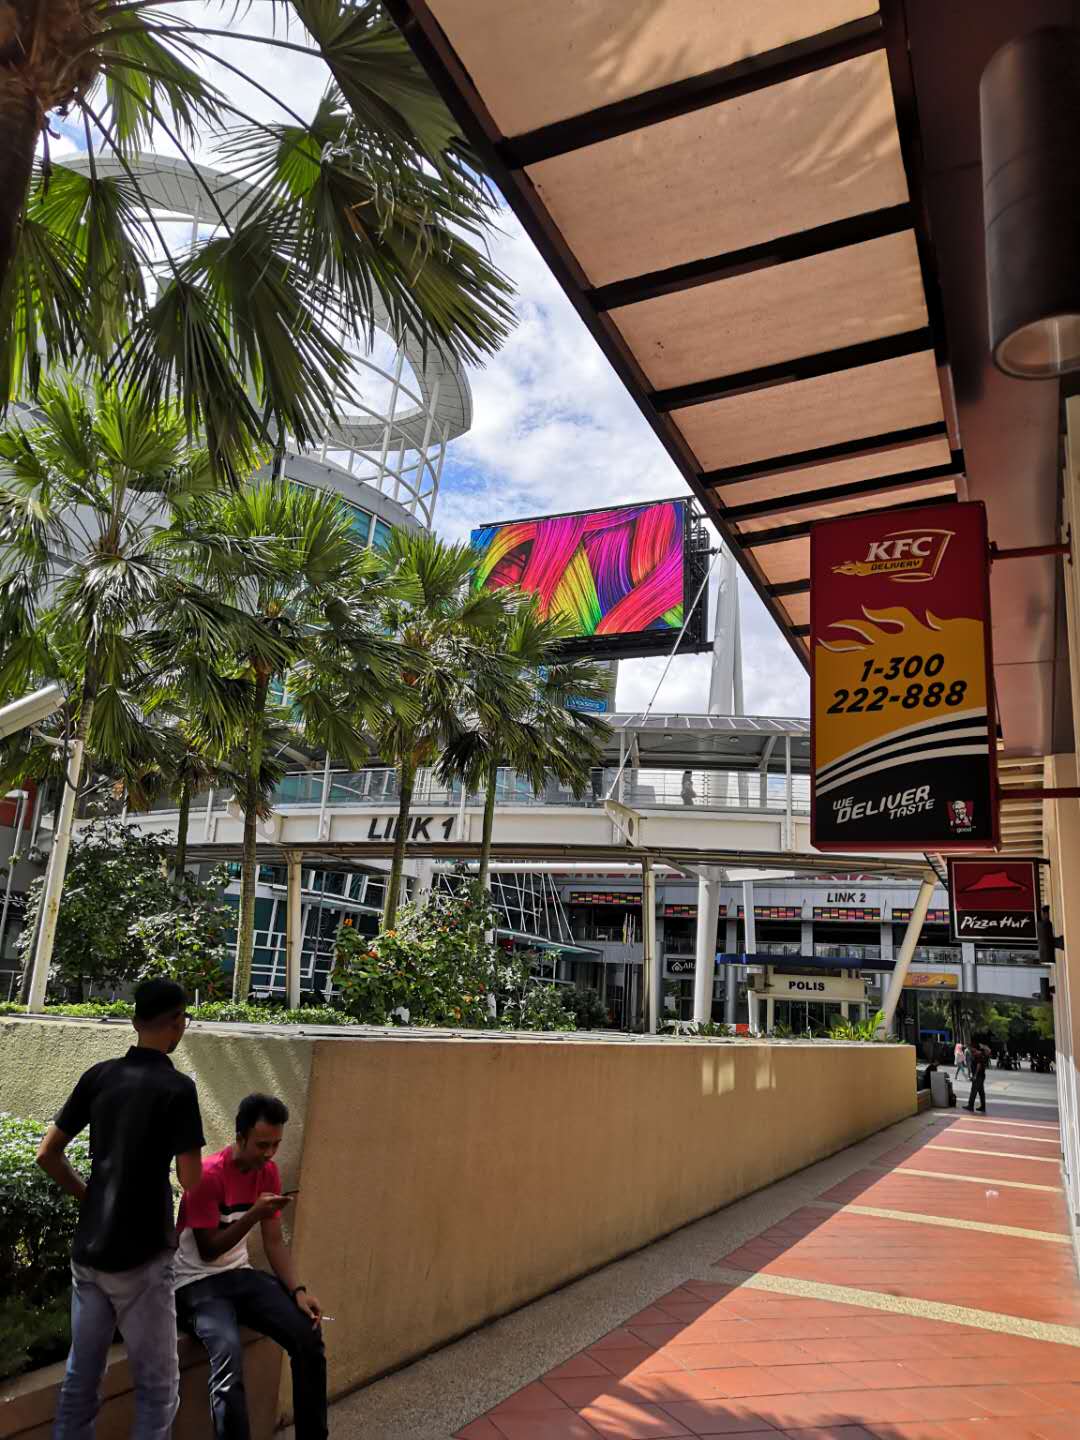 led-screen-digital-billboard-display-at-the-curve-kl-damansara-malaysia-double-sided-led-screen-full-color4_orig